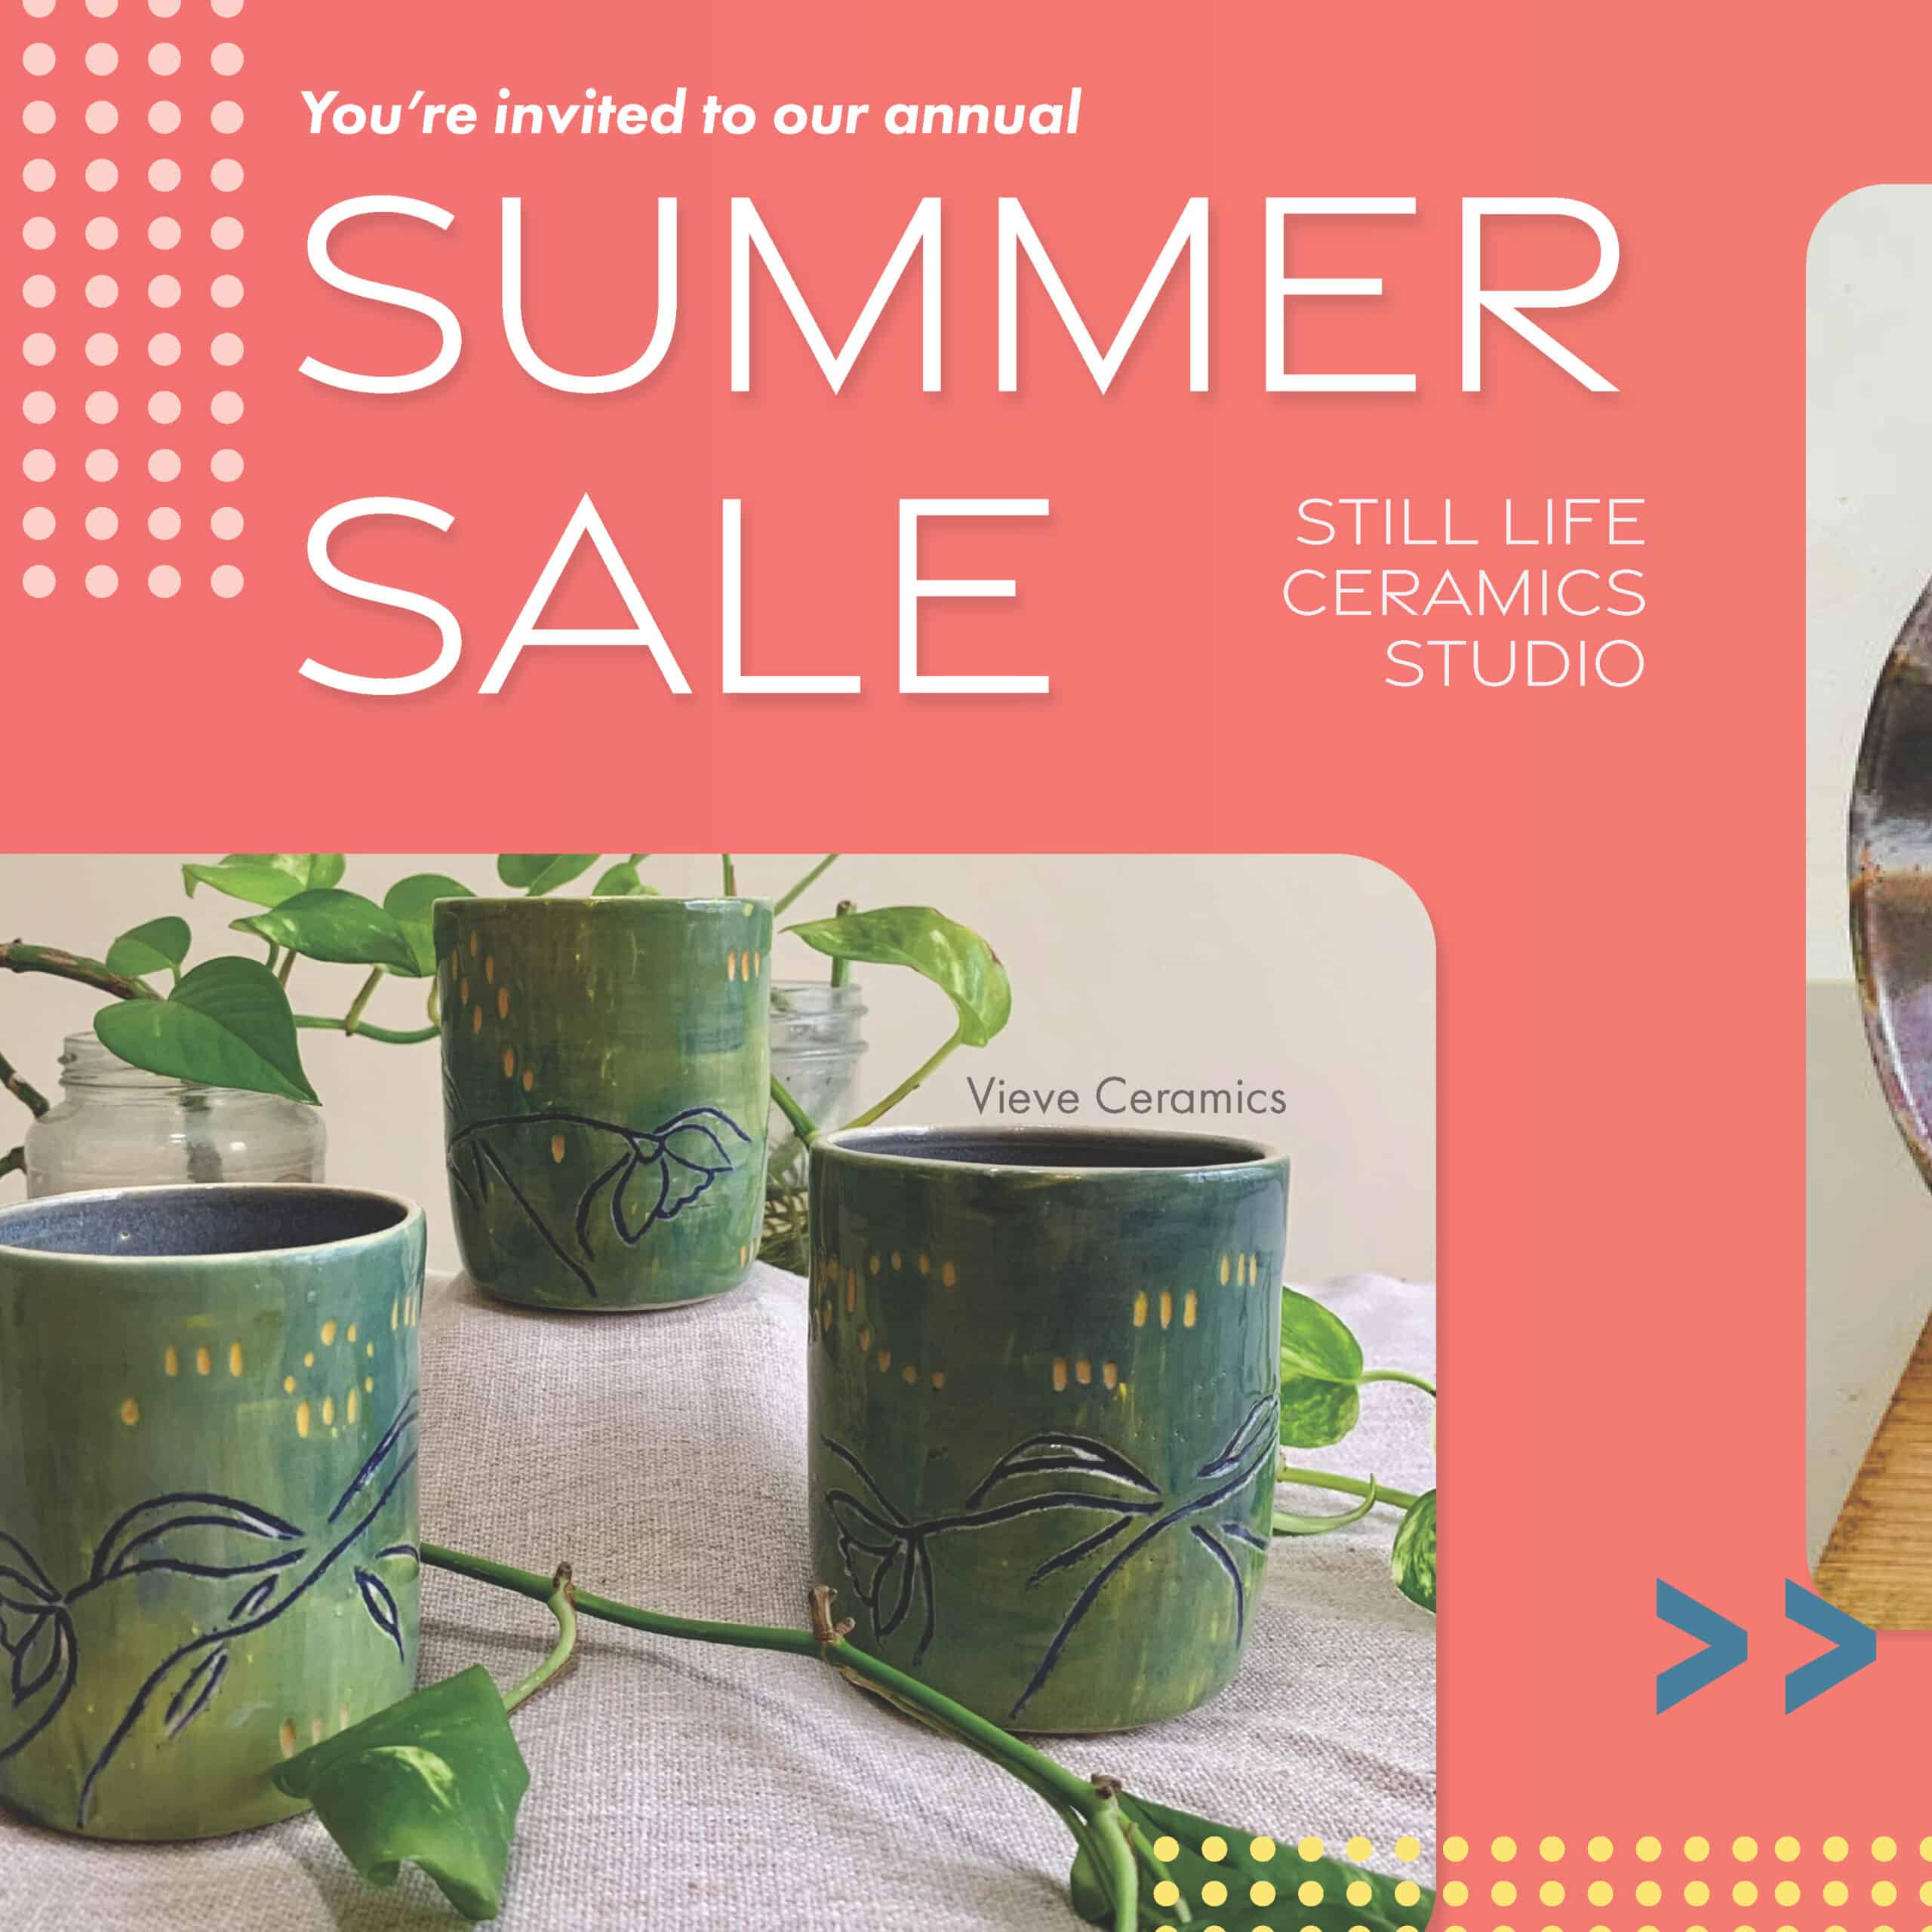 You’re invited to Still Life Studio’s annual summer sale!